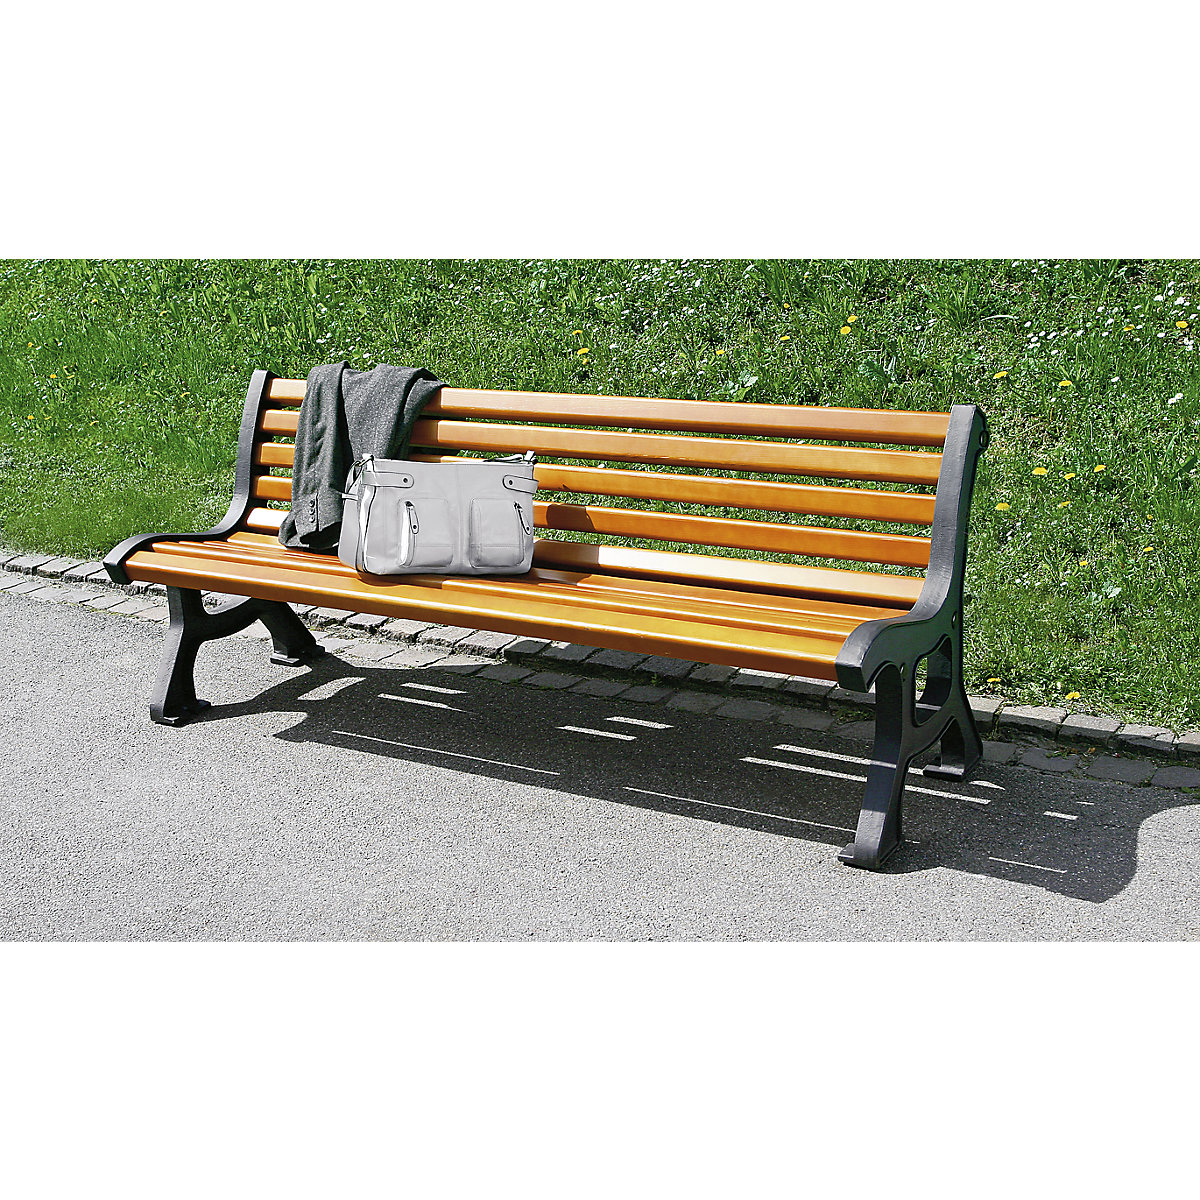 Solid wooden bench, without arm rests, meranti wood slats